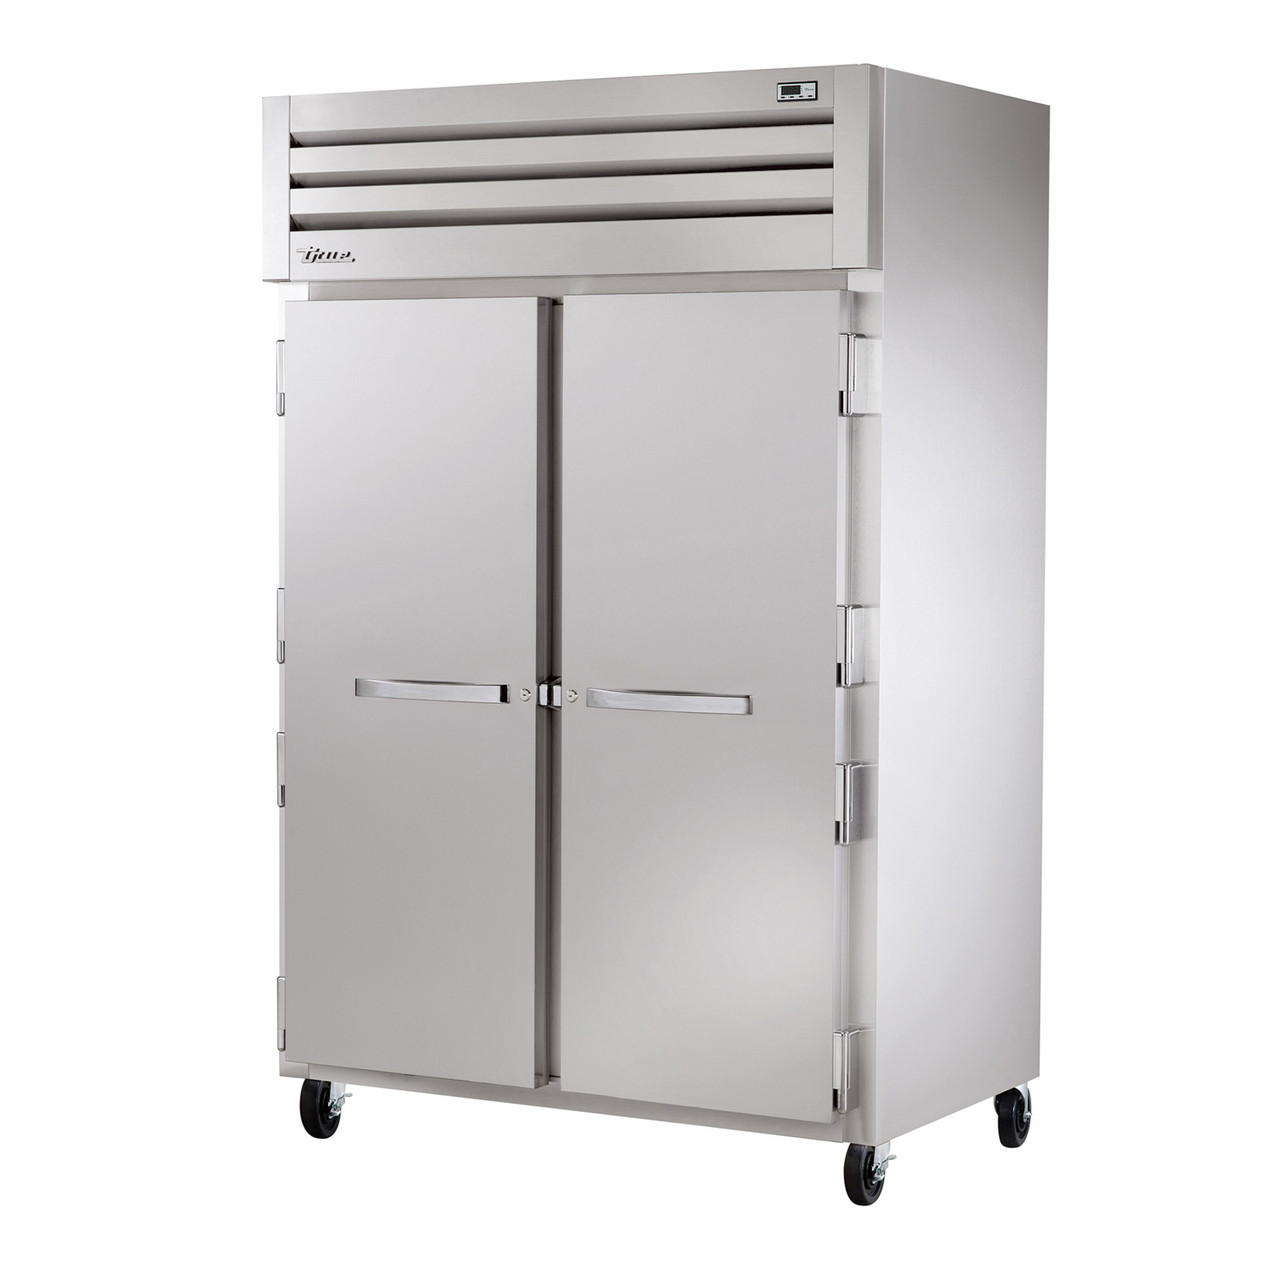 True Manufacturing STG2H-2S Spec Series 2 Section Heated Reach In Cabinet with Solid Doors - Aluminum Sides & Interior